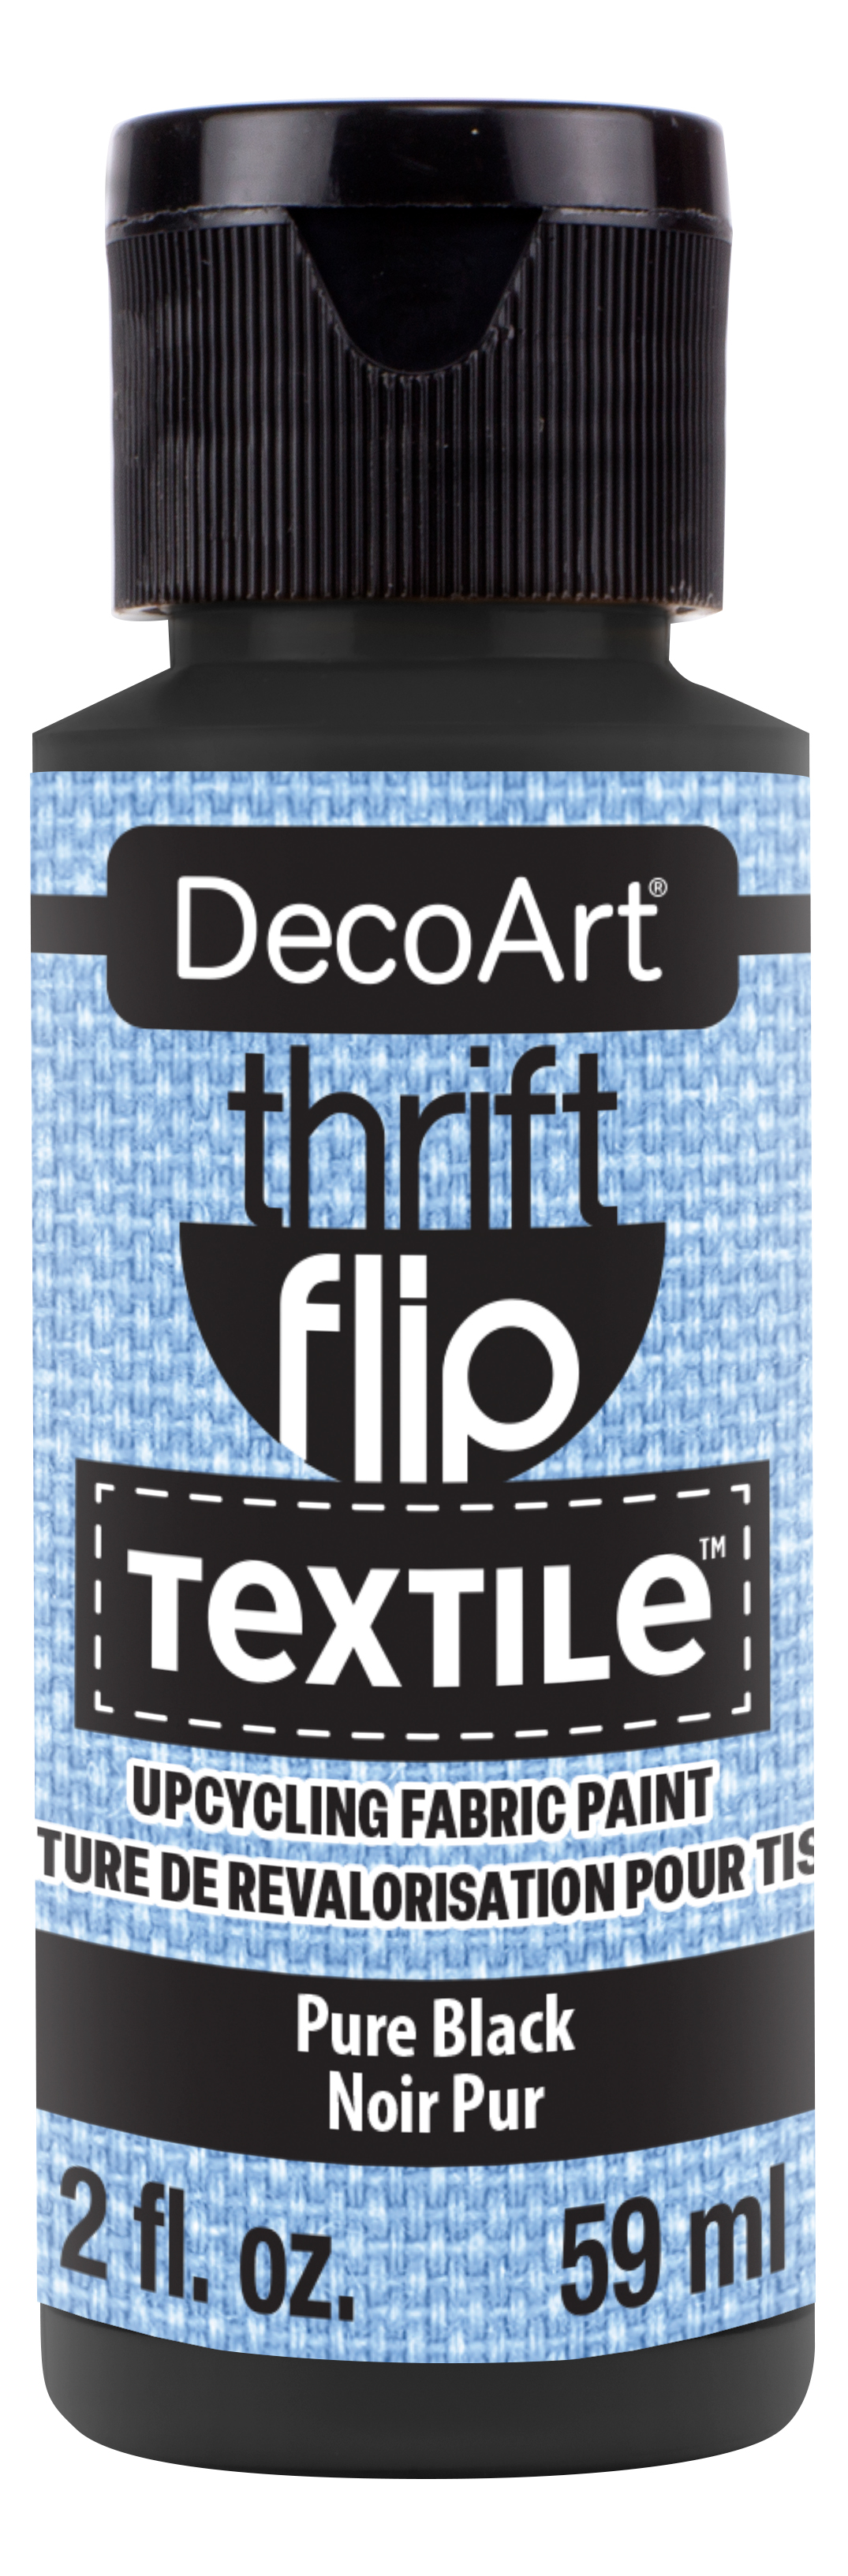 DecoArt SoSoft Fabric Paints and Tools - The Sewing Place